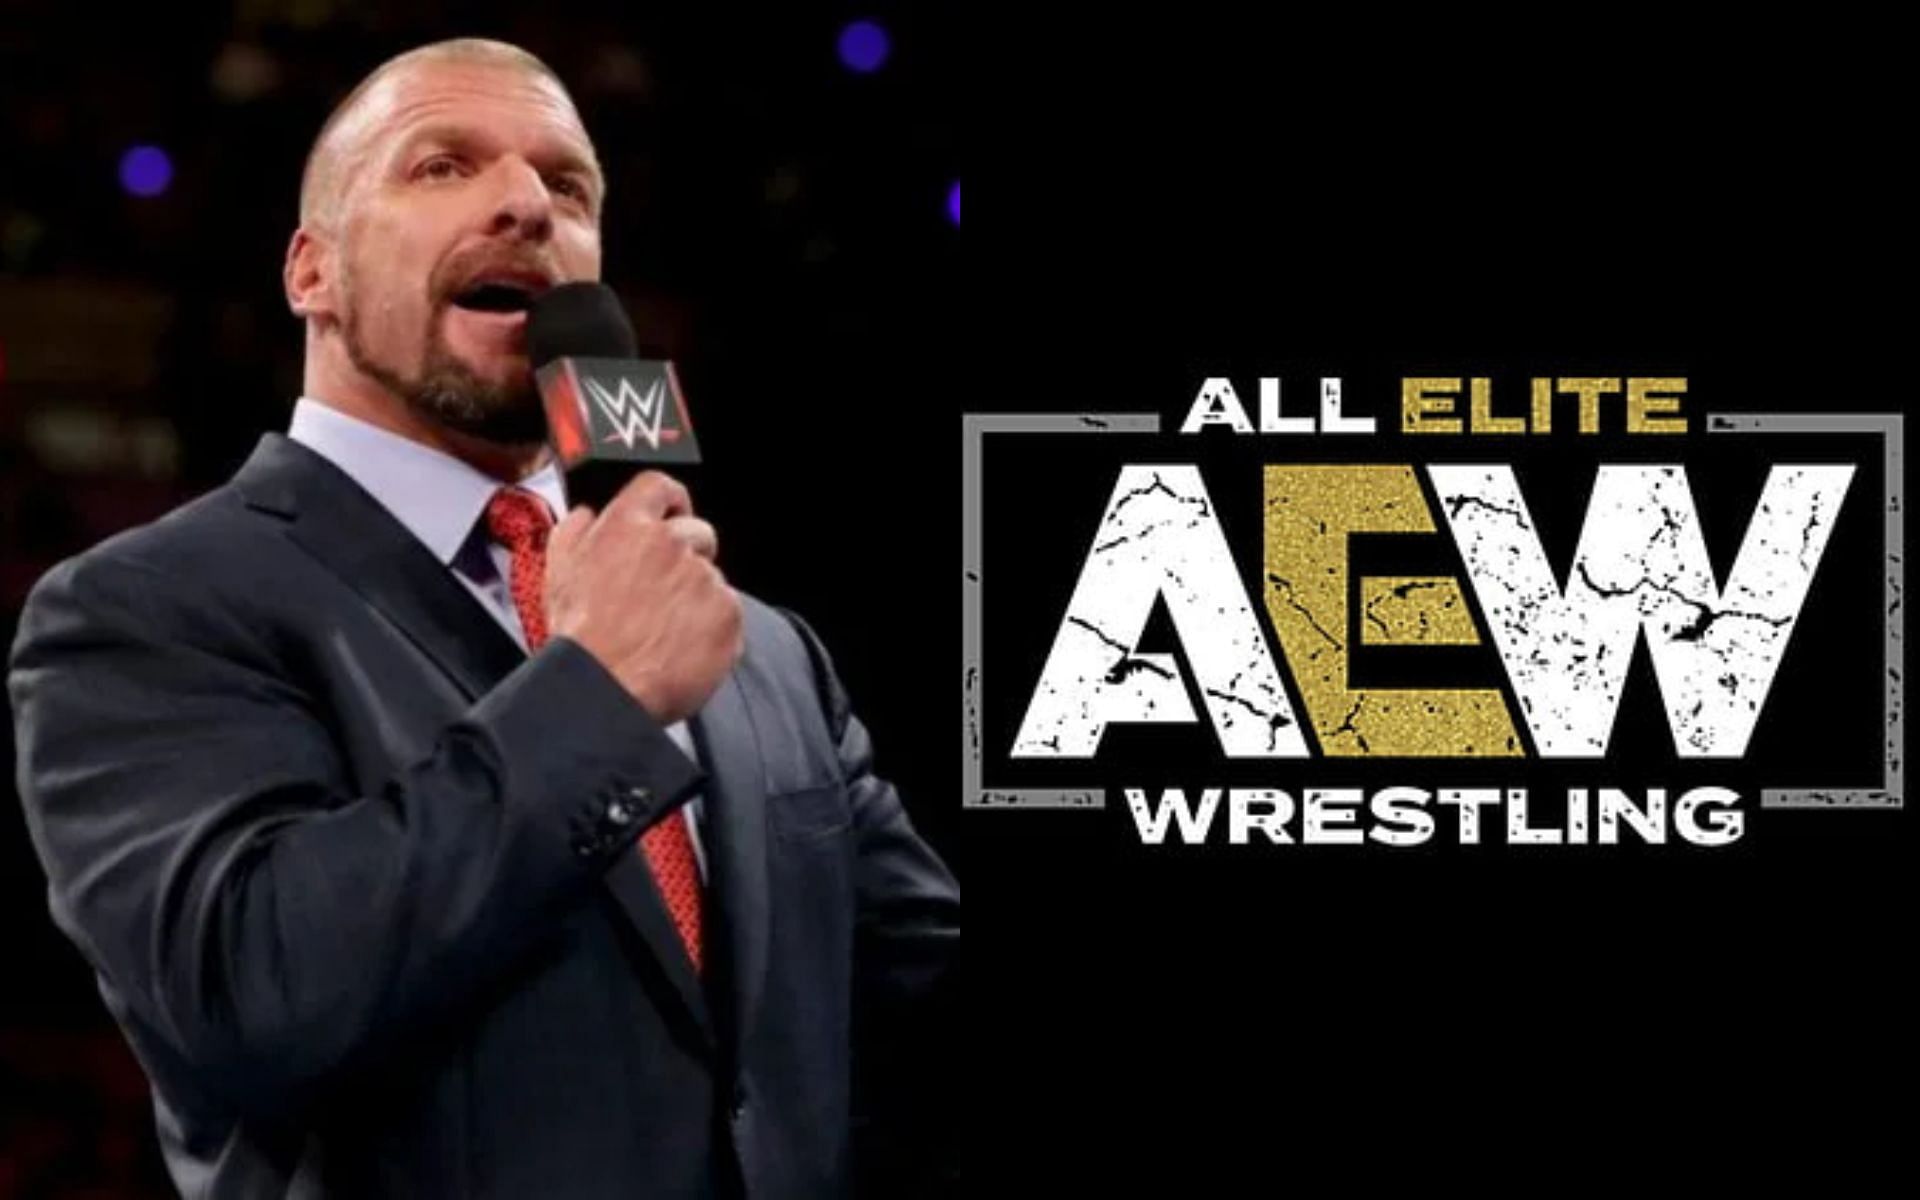 WWE Head of Creative, Triple H (left) and AEW logo (right).